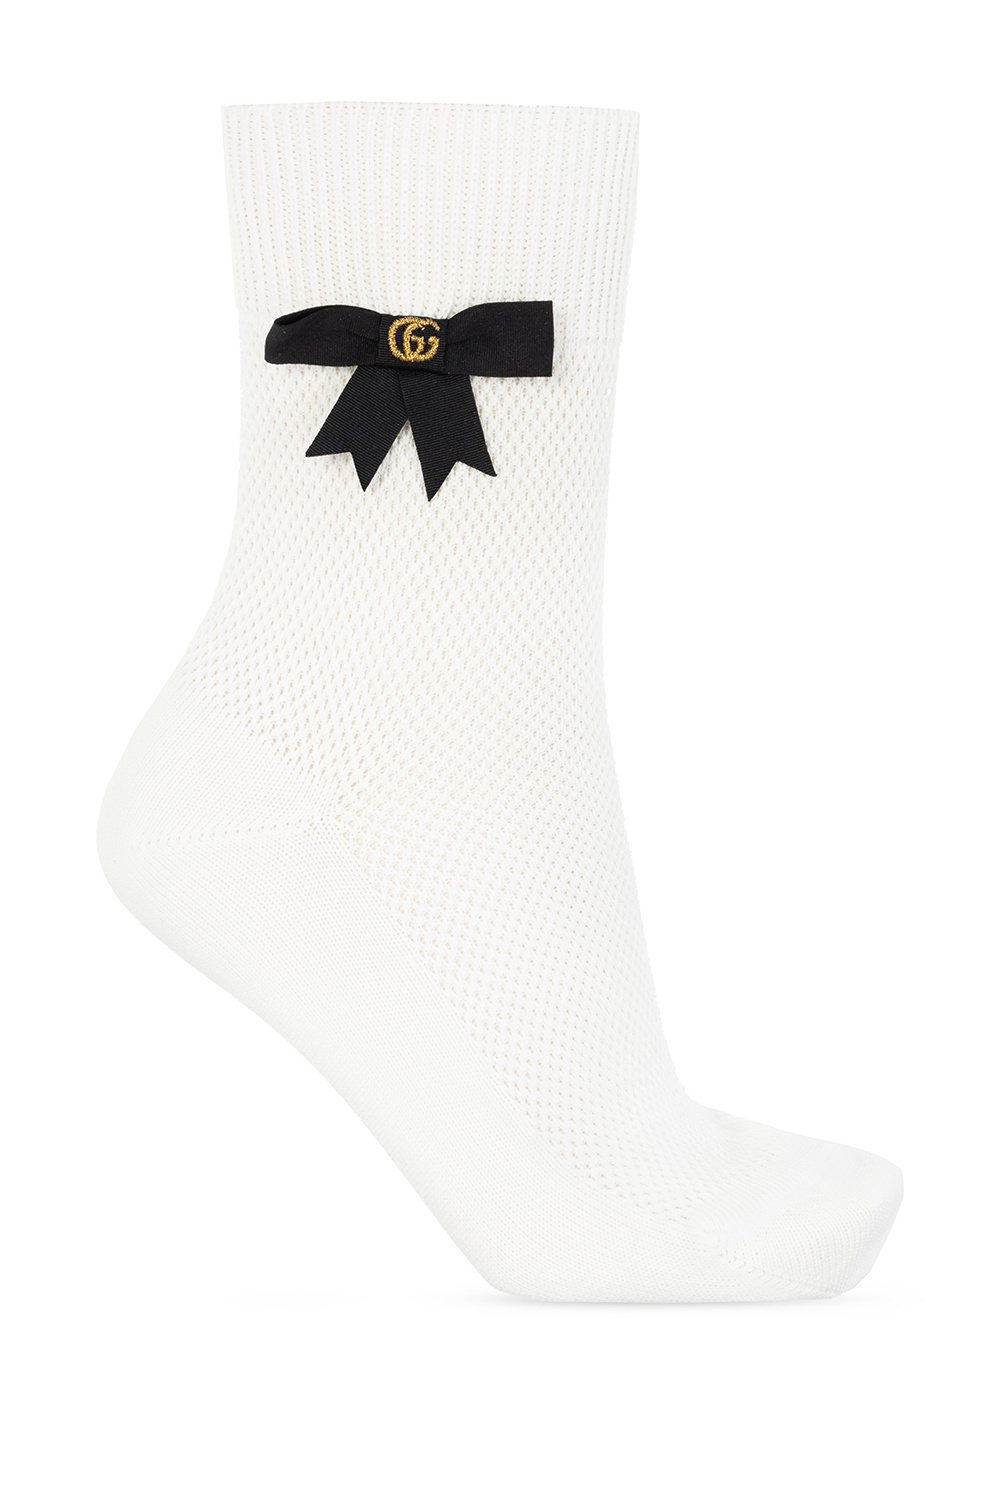 Gucci Socks with bow | Women's Clothing | Vitkac